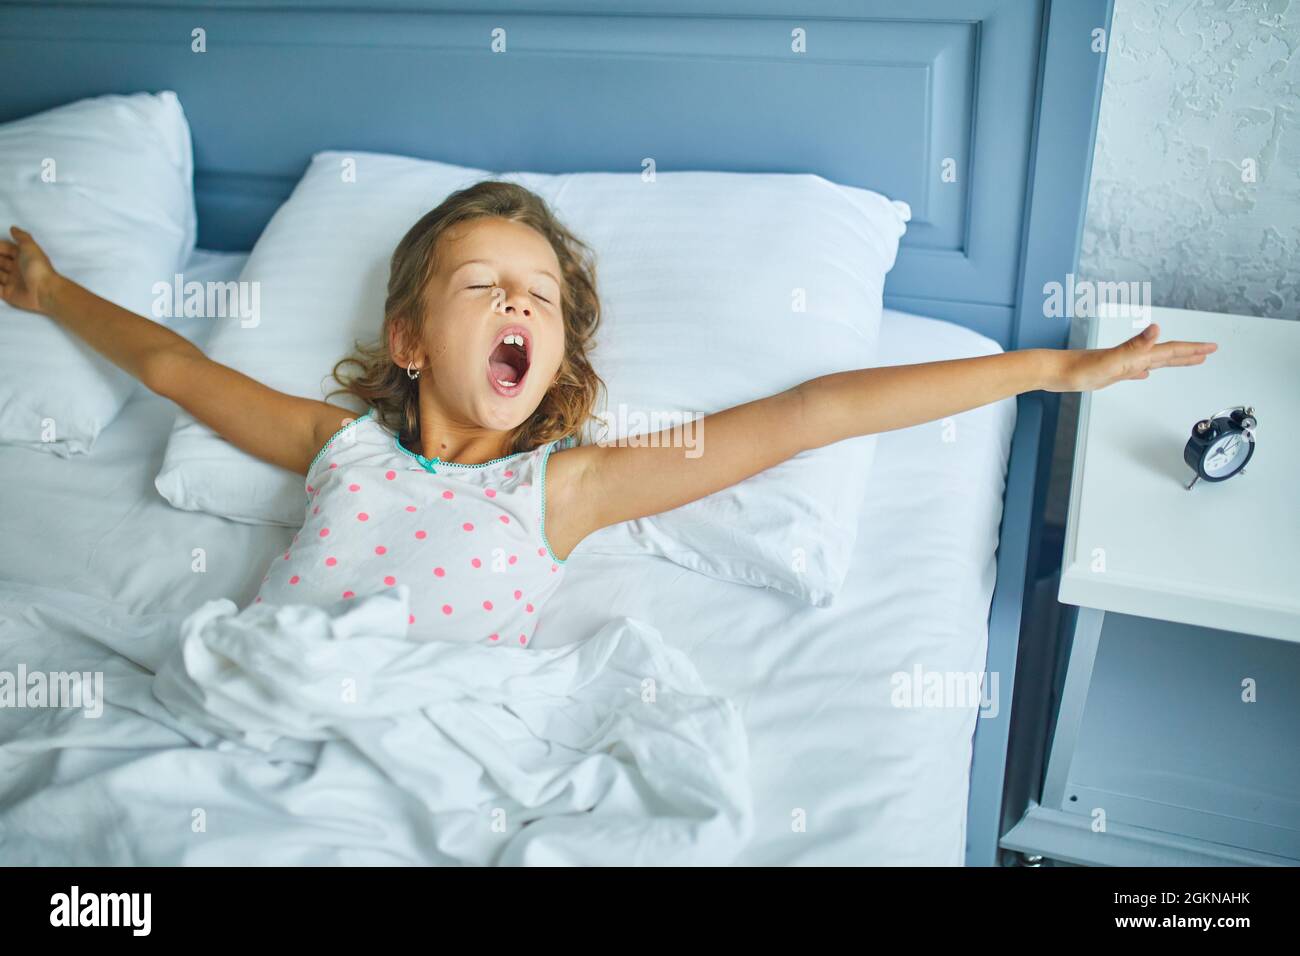 Little girl wakes up from sleep on a big and cozy bed white linen